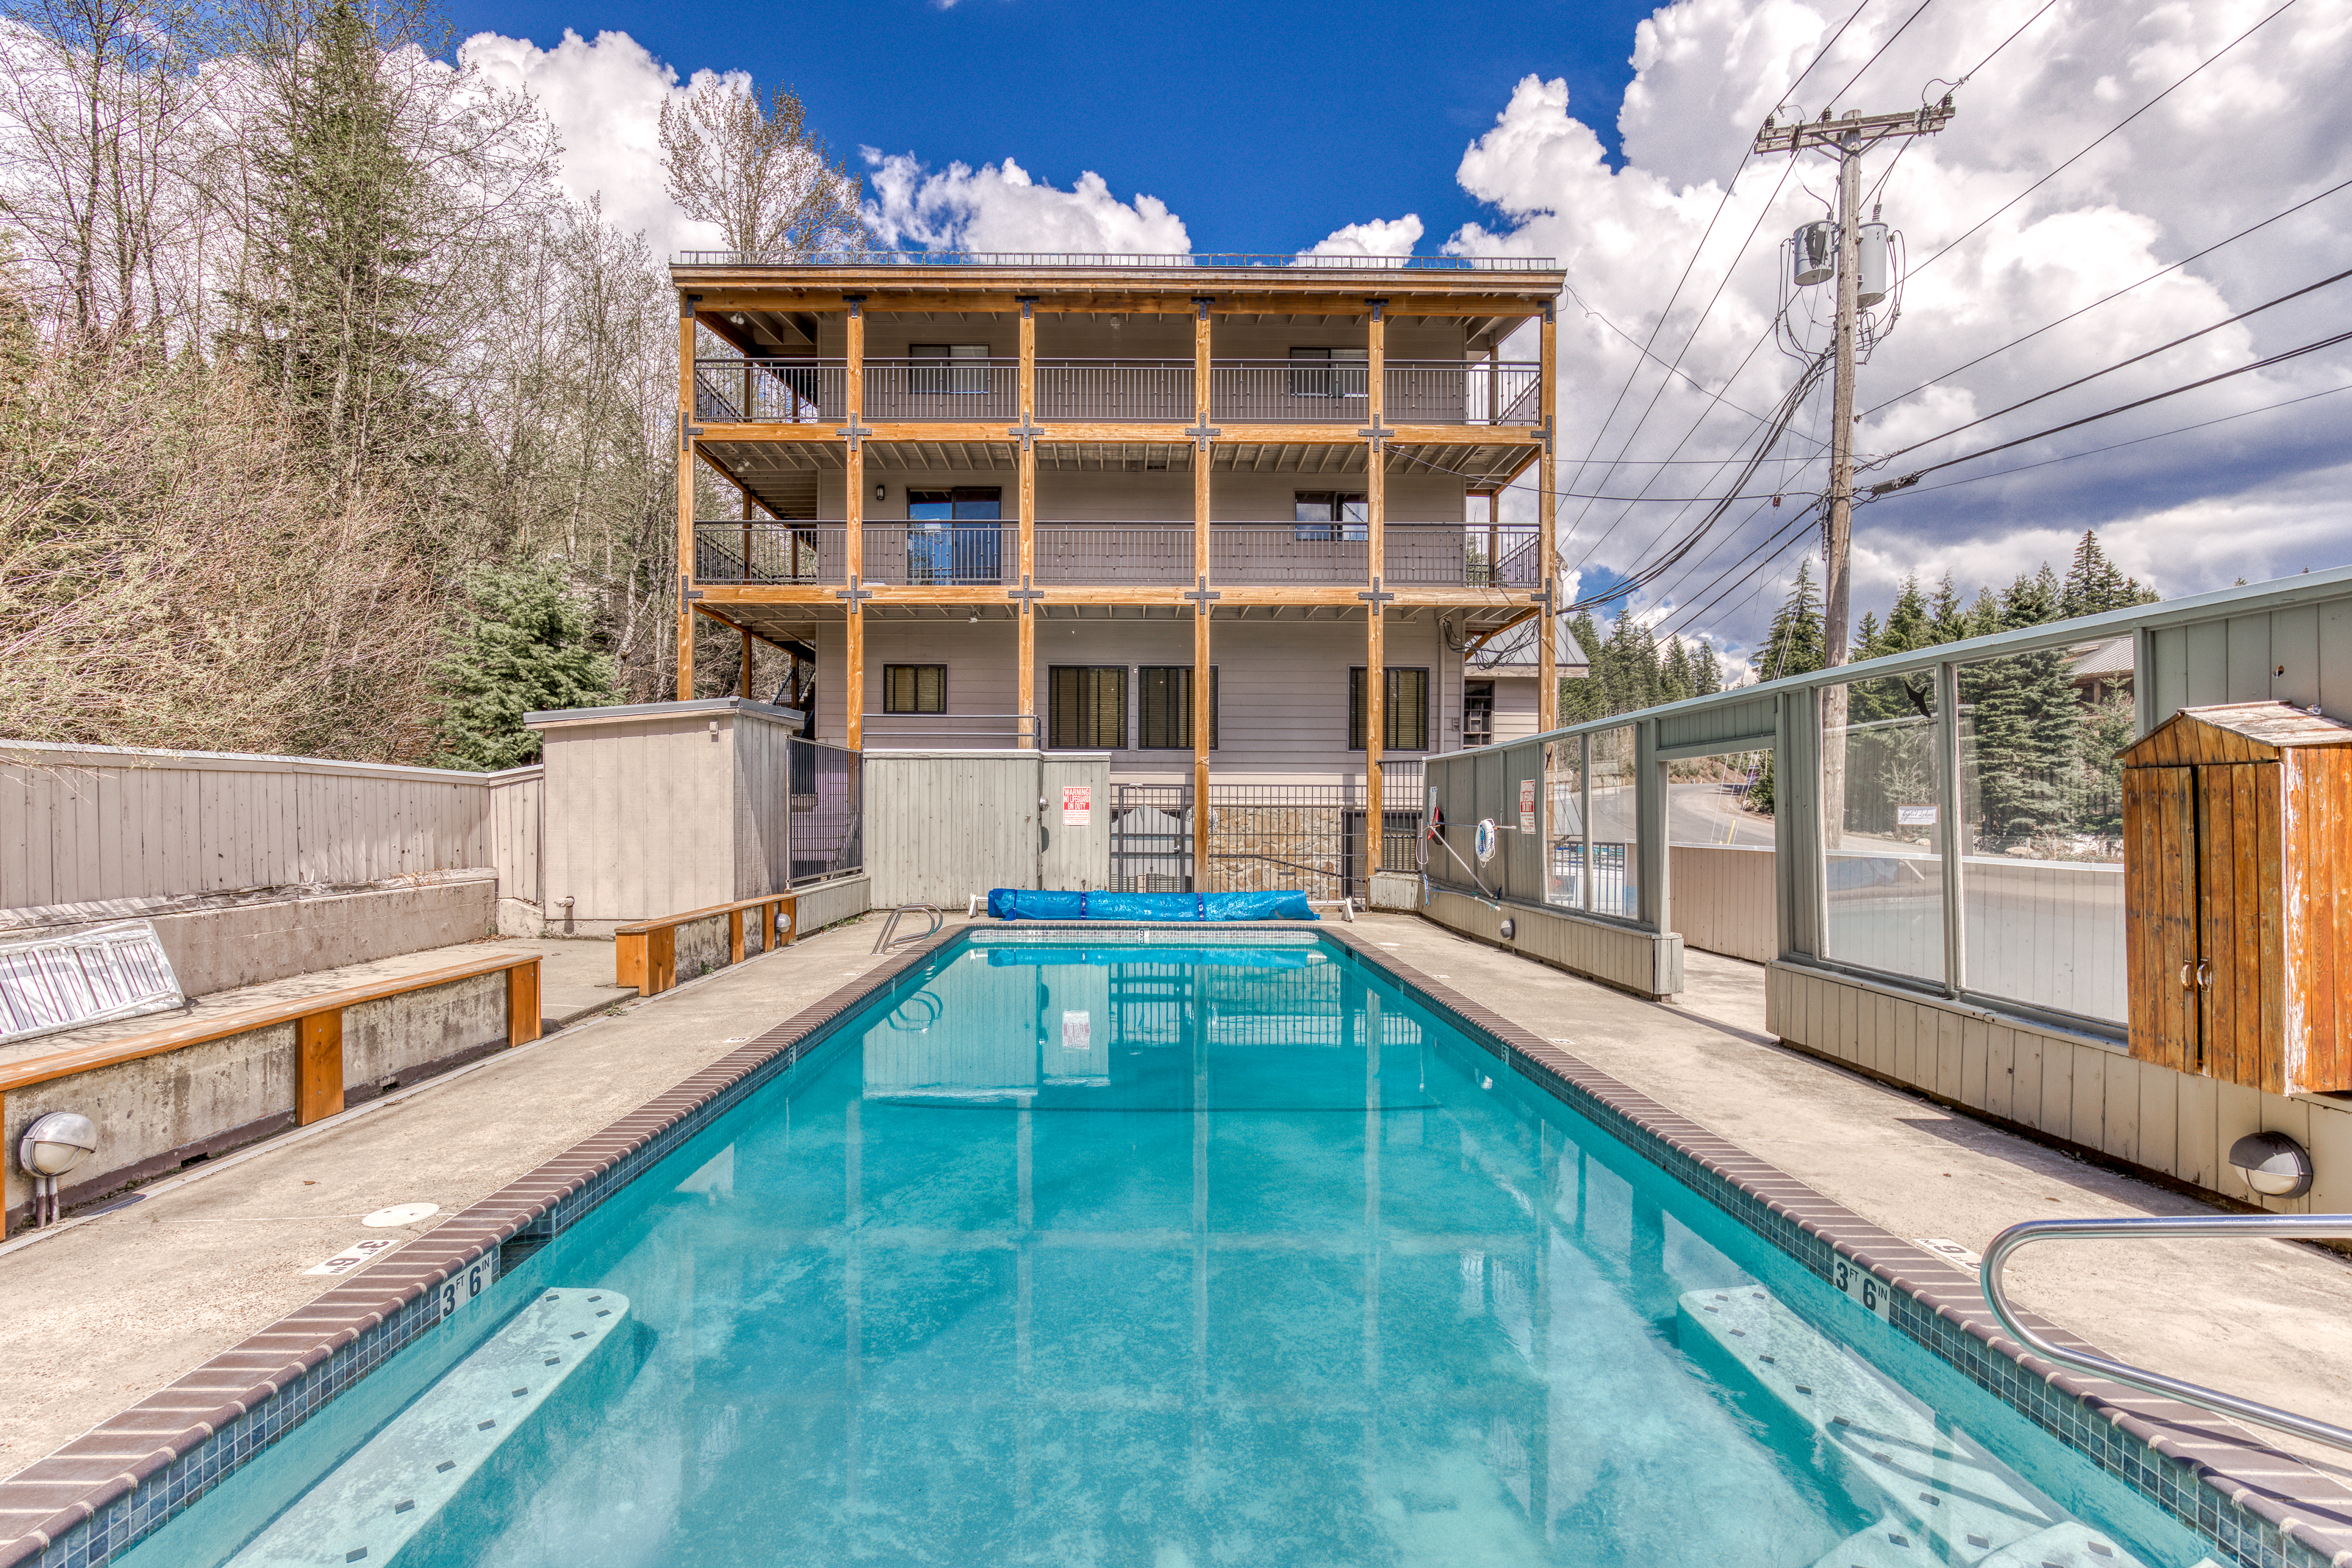 Enjoy a big heated pool after a long day on the slopes